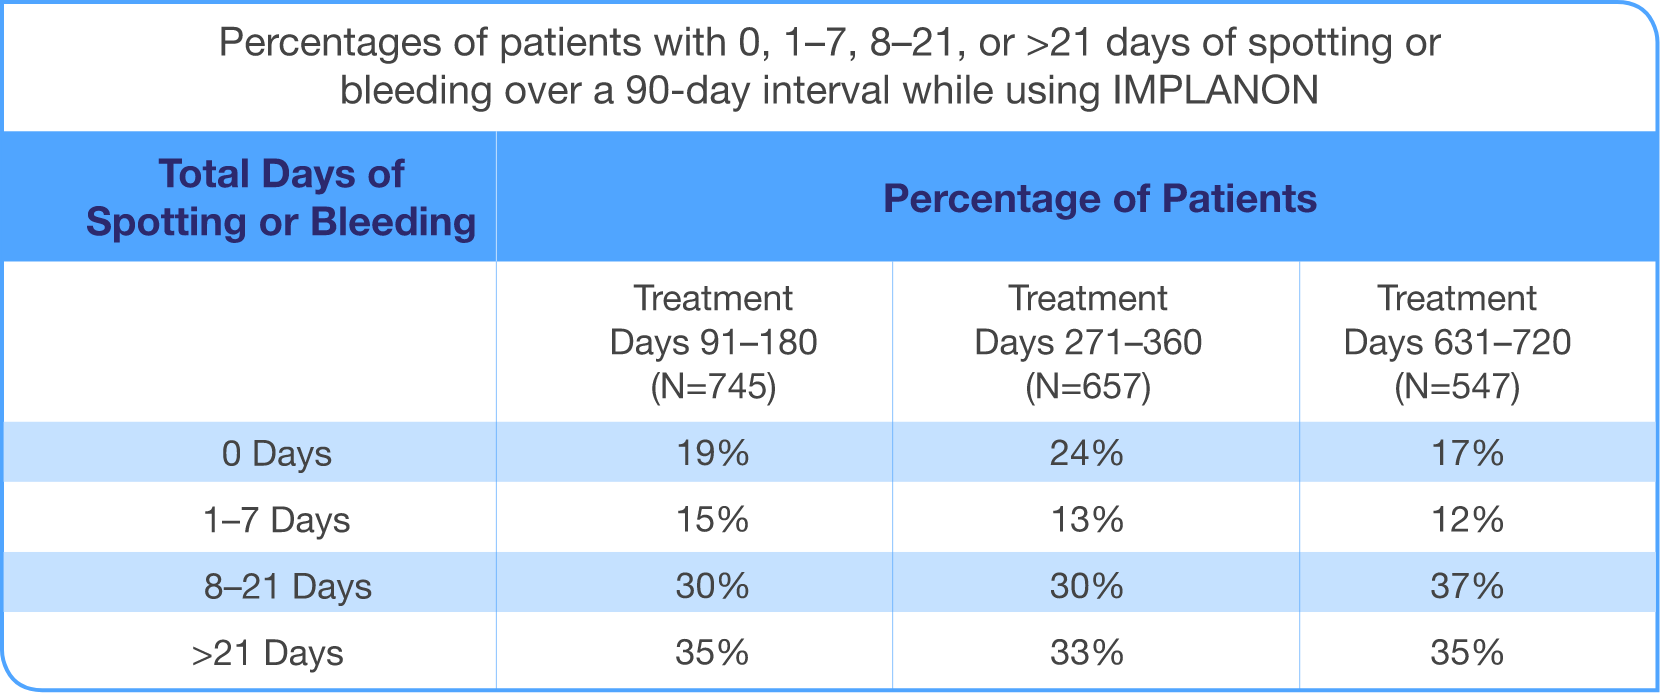 Chart Representing the Percentage of Bleeding or Spotting Days Based on Data From Clinical Trials